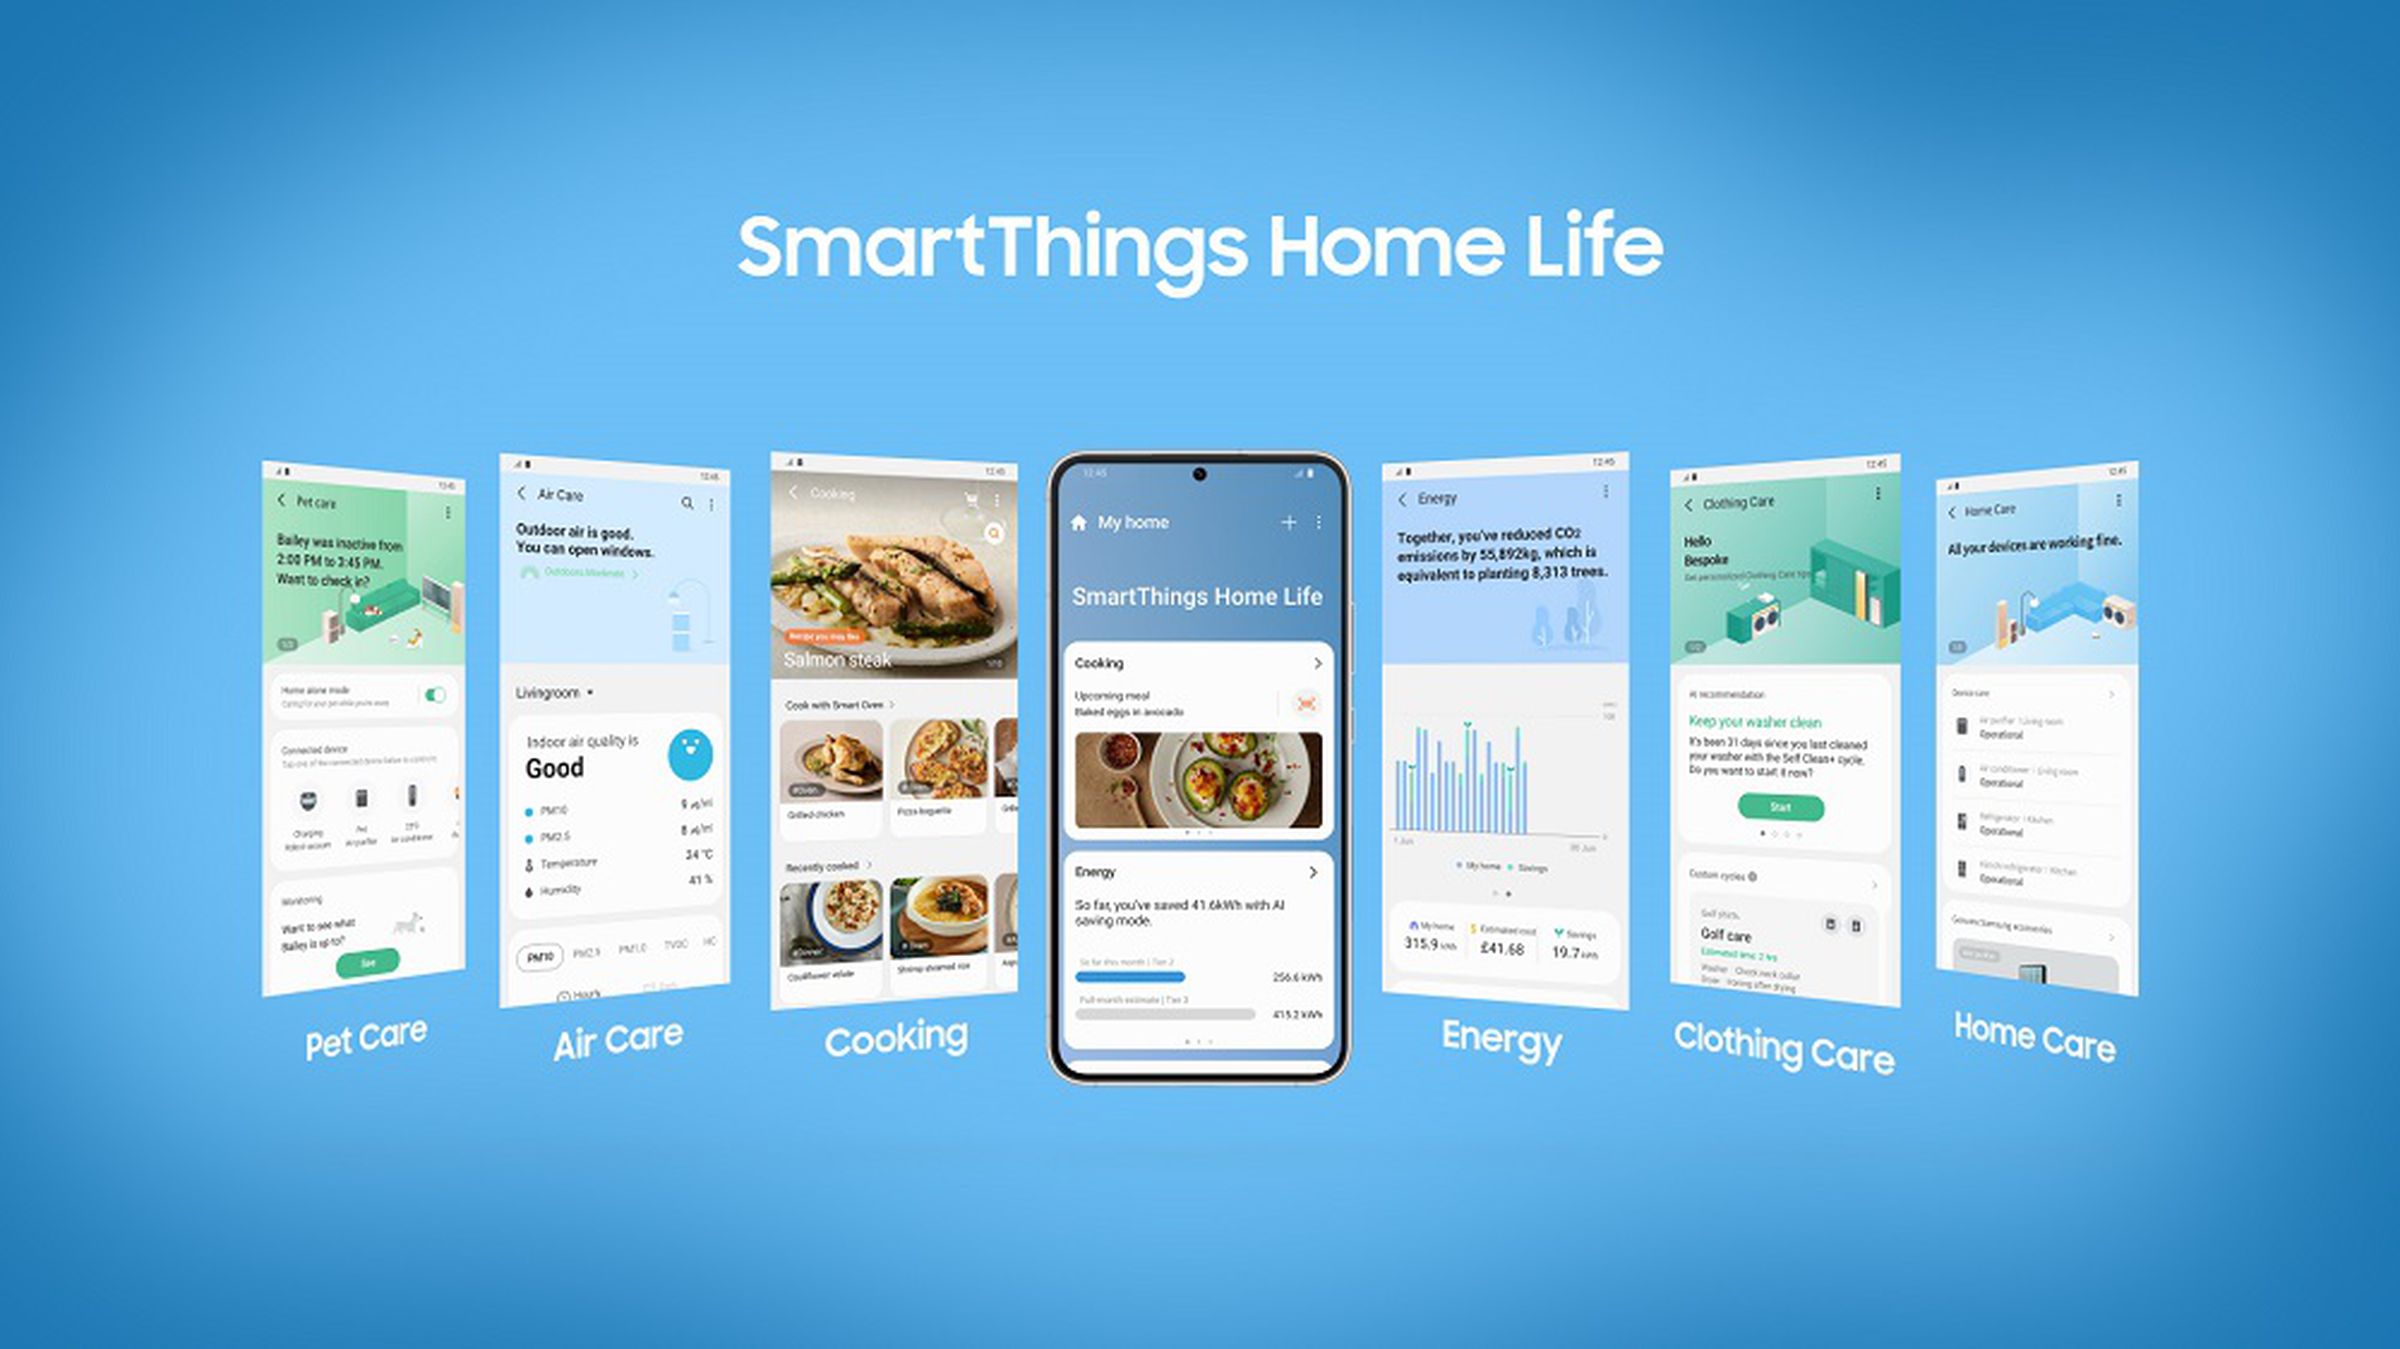 SmartThings Home Life will go global this month.